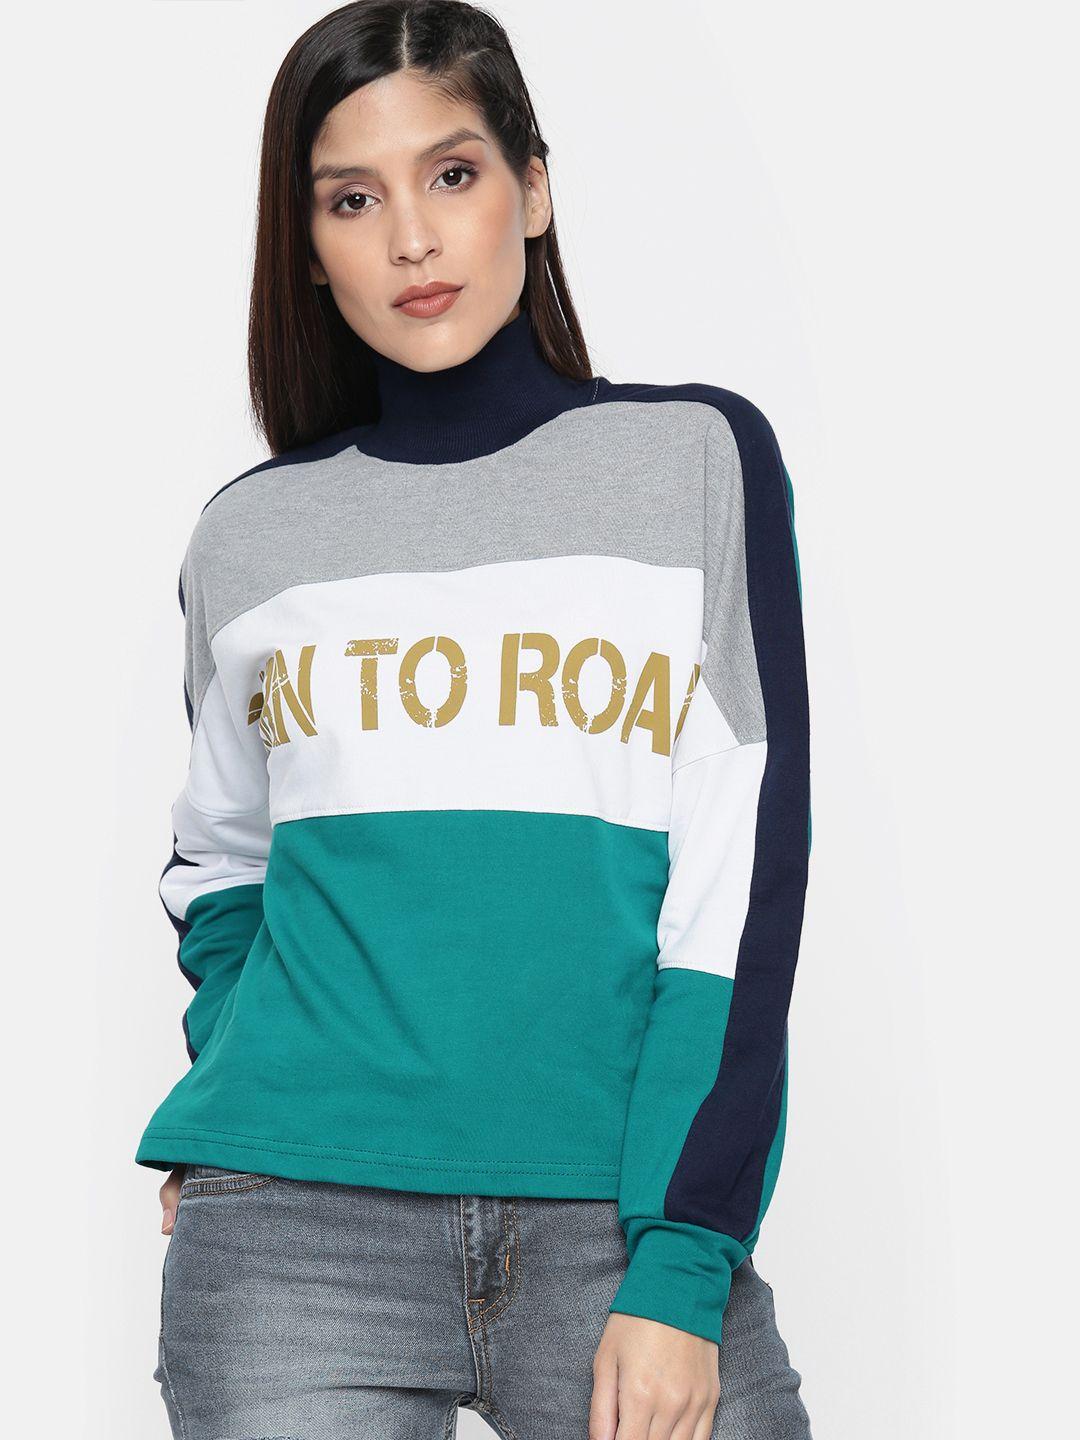 the roadster lifestyle co women teal green & white colourblocked lightweight pullover sweatshirt